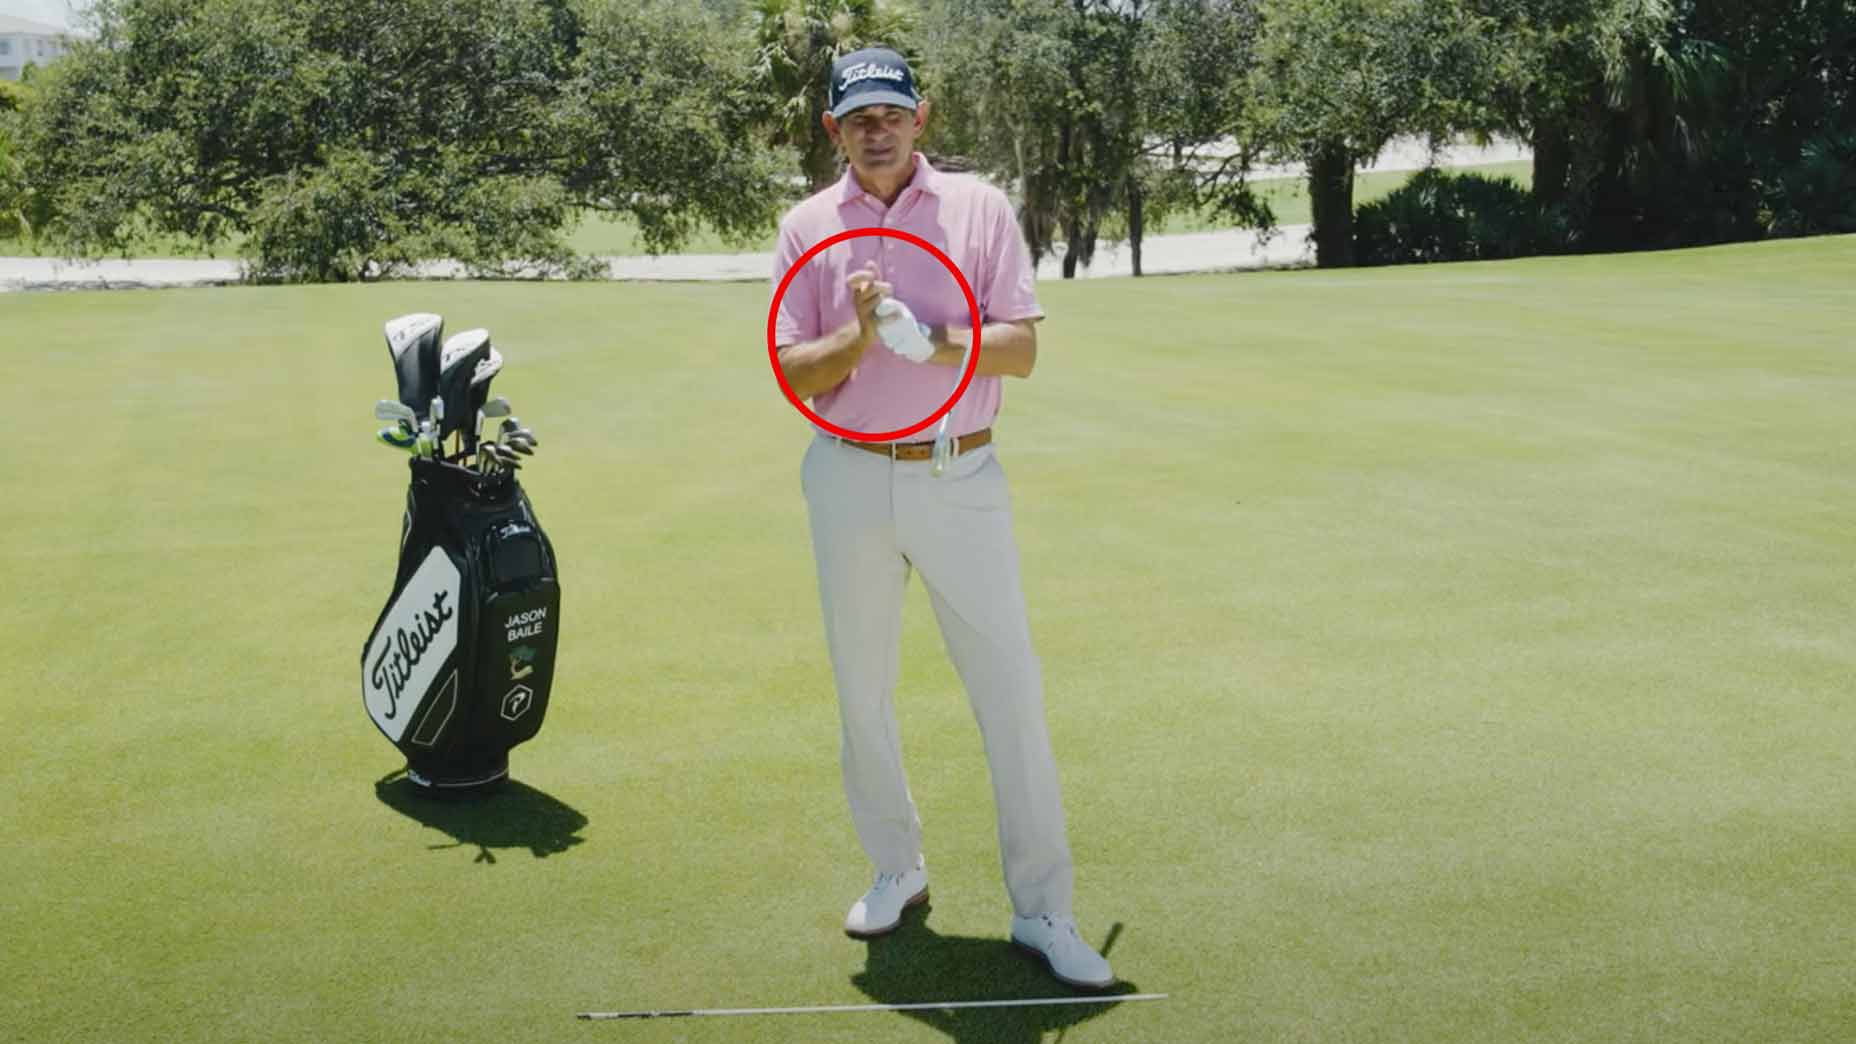 Wondering what the proper golf grip pressure should be? GOLF Top 100 Teacher Jason Baile shares a quick refresher to help you out